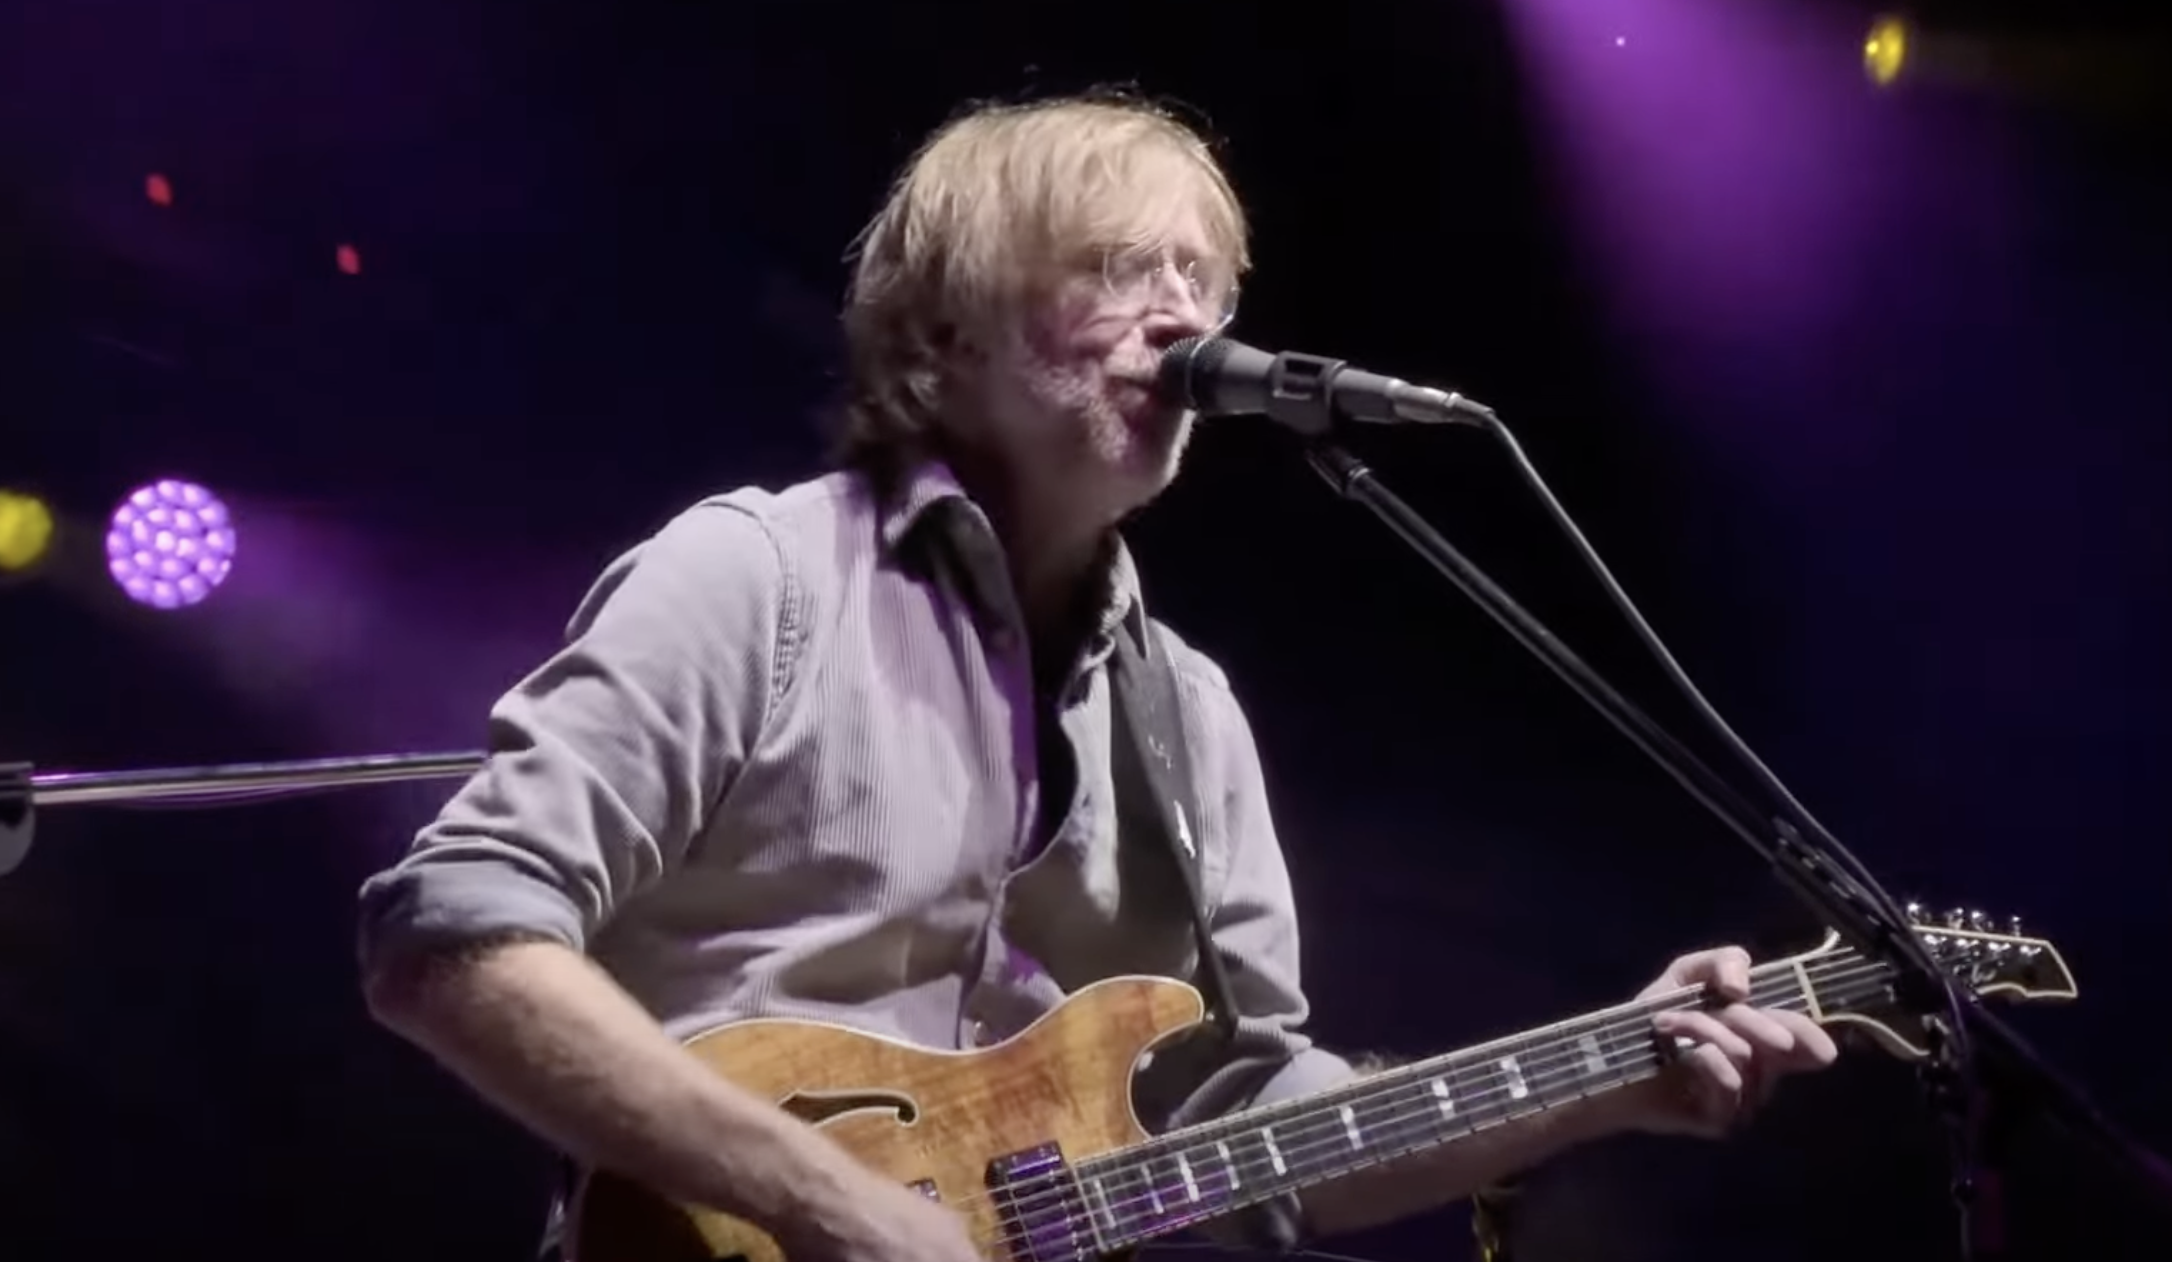 Phish Cover “L.A. Woman” at The Forum, Marking First Version Since 2003